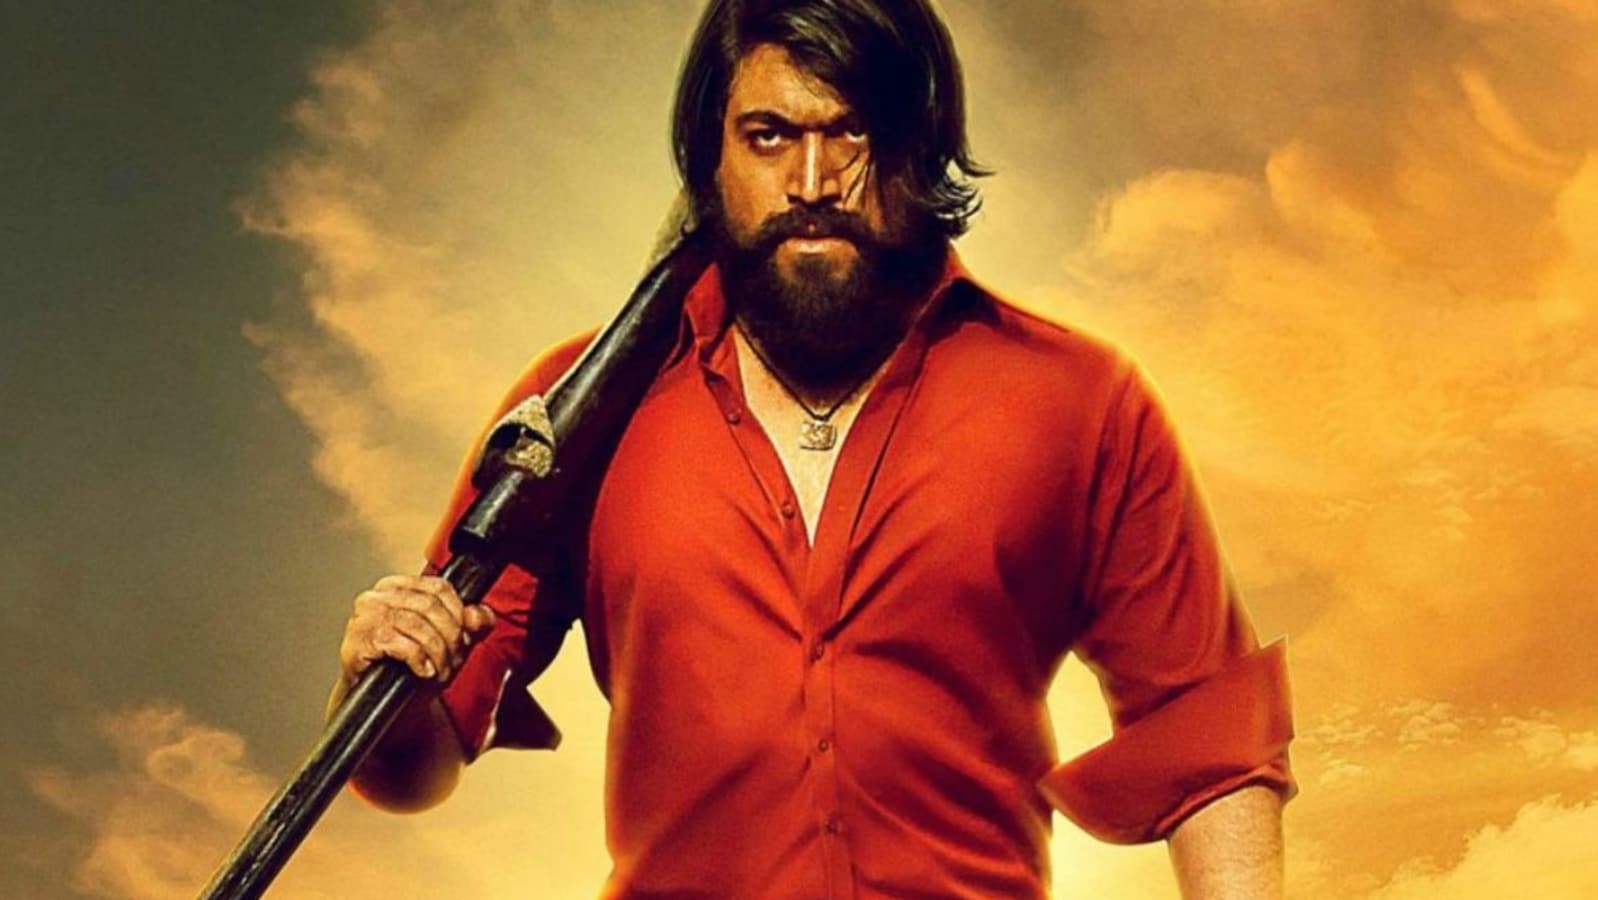 KGF Chapter 2 box office day 5 collection: Yash’s film crosses ₹600 crore, is among top-10 highest-grossing Indian films